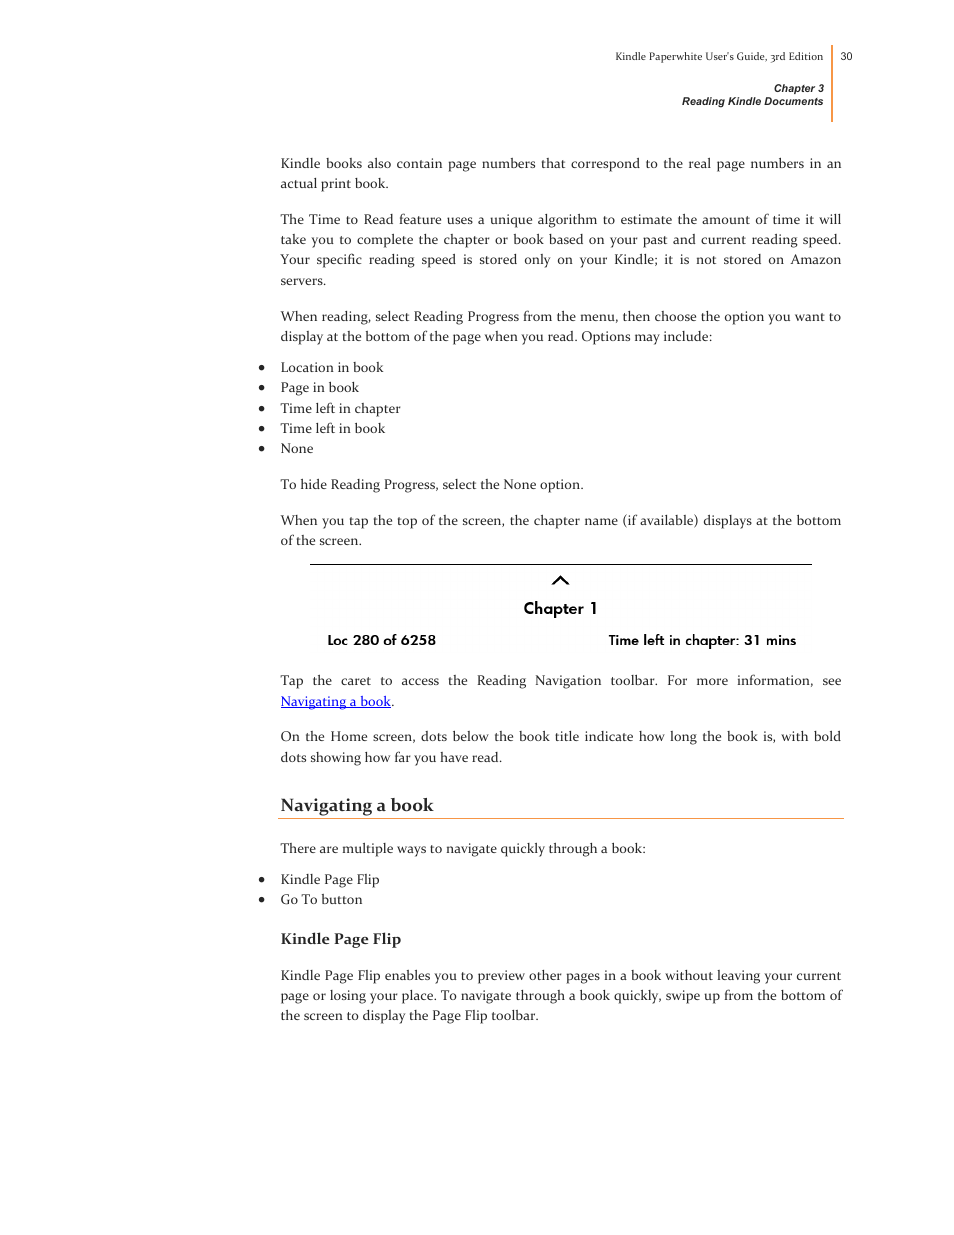 Navigating a book | Kindle Paperwhite (2nd Generation) User Manual | Page 30 / 47